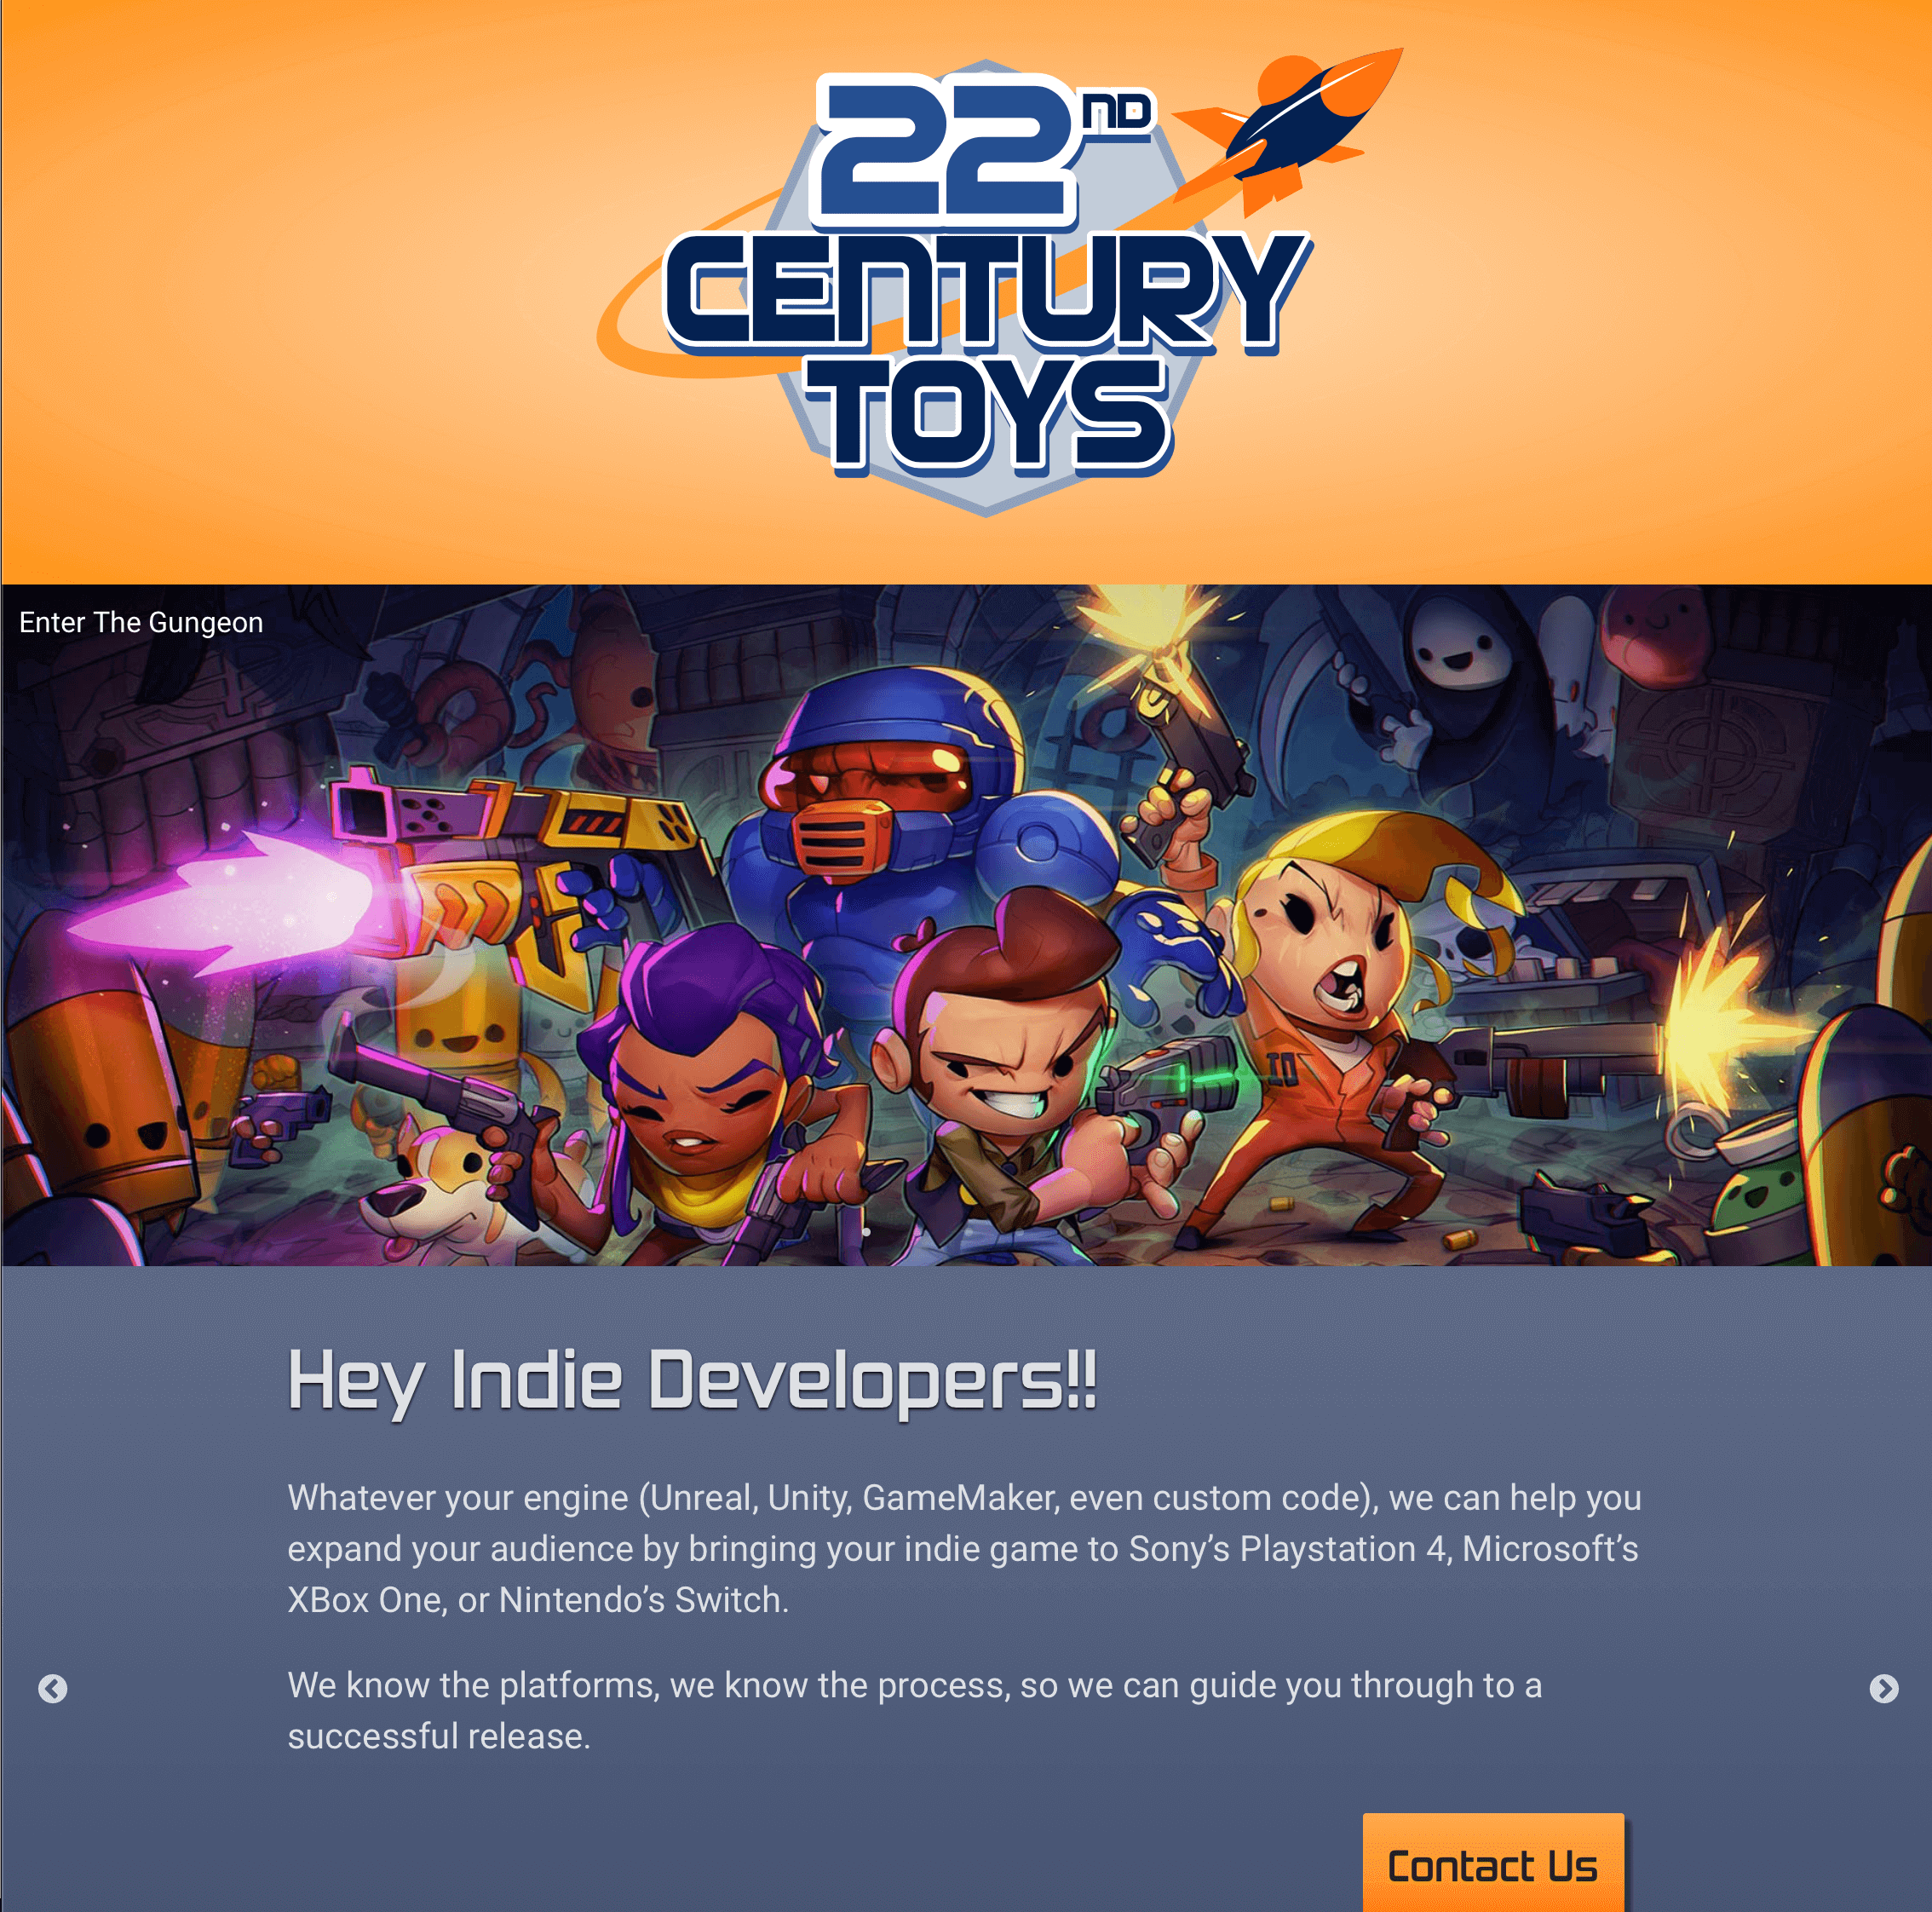 a screenshot of the 22nd Century Toys website